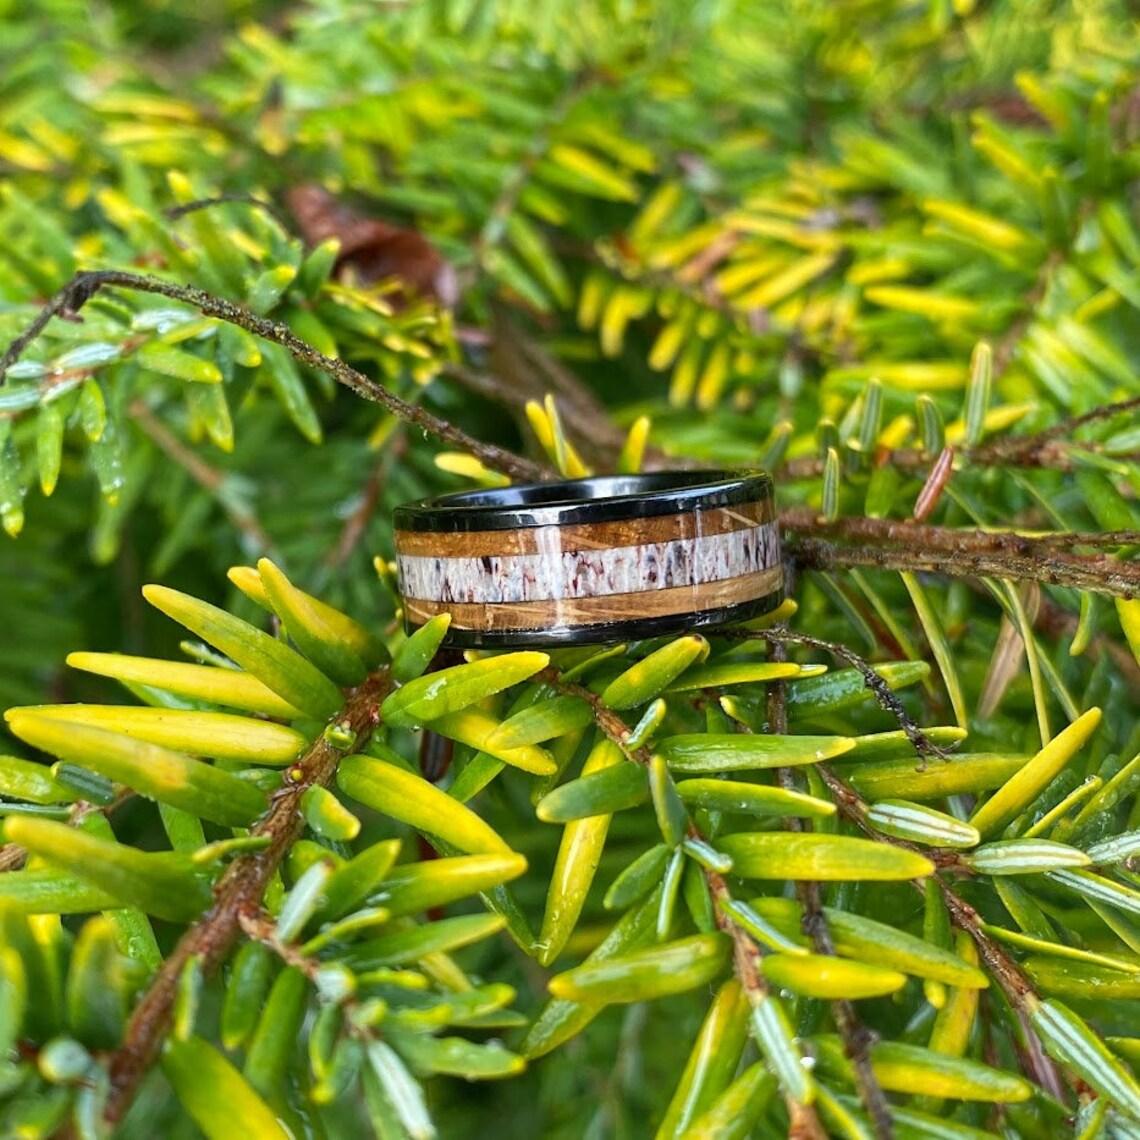 Antler and Whiskey Barrel Wood Ring